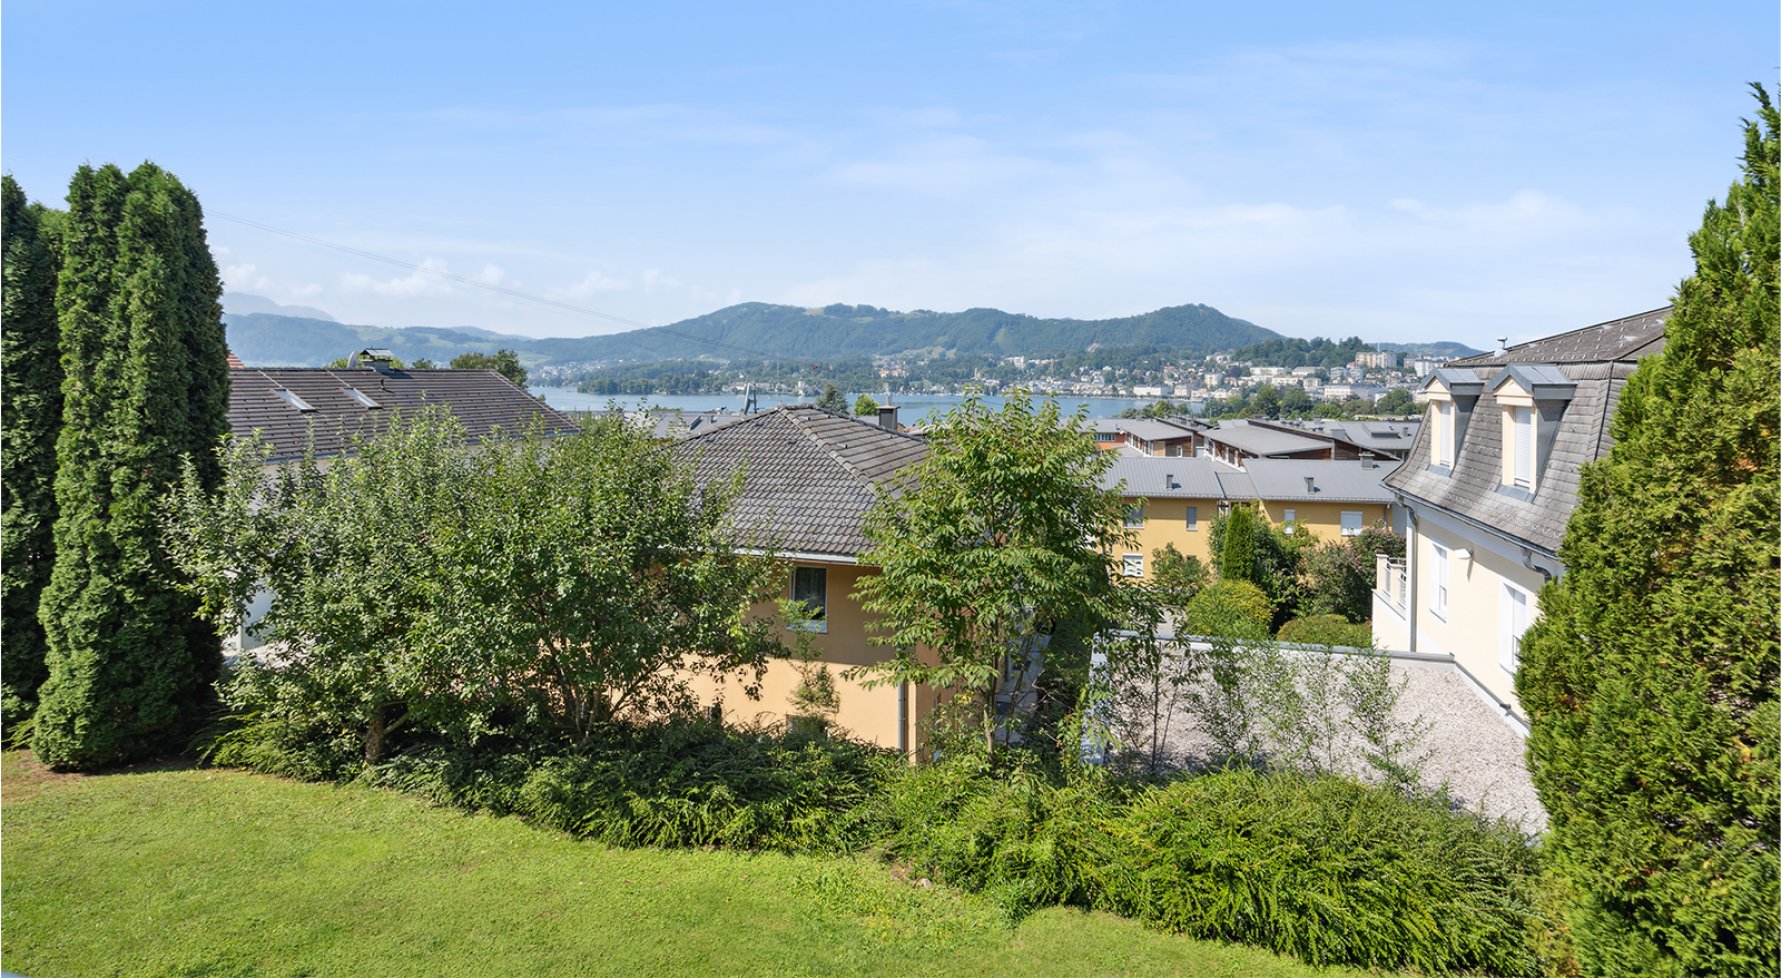 Property in 4810 Salzkammergut - Gmunden : BEST LOCATION IN GMUNDEN! Stately villa with a view of Lake Traunsee ... - picture 1